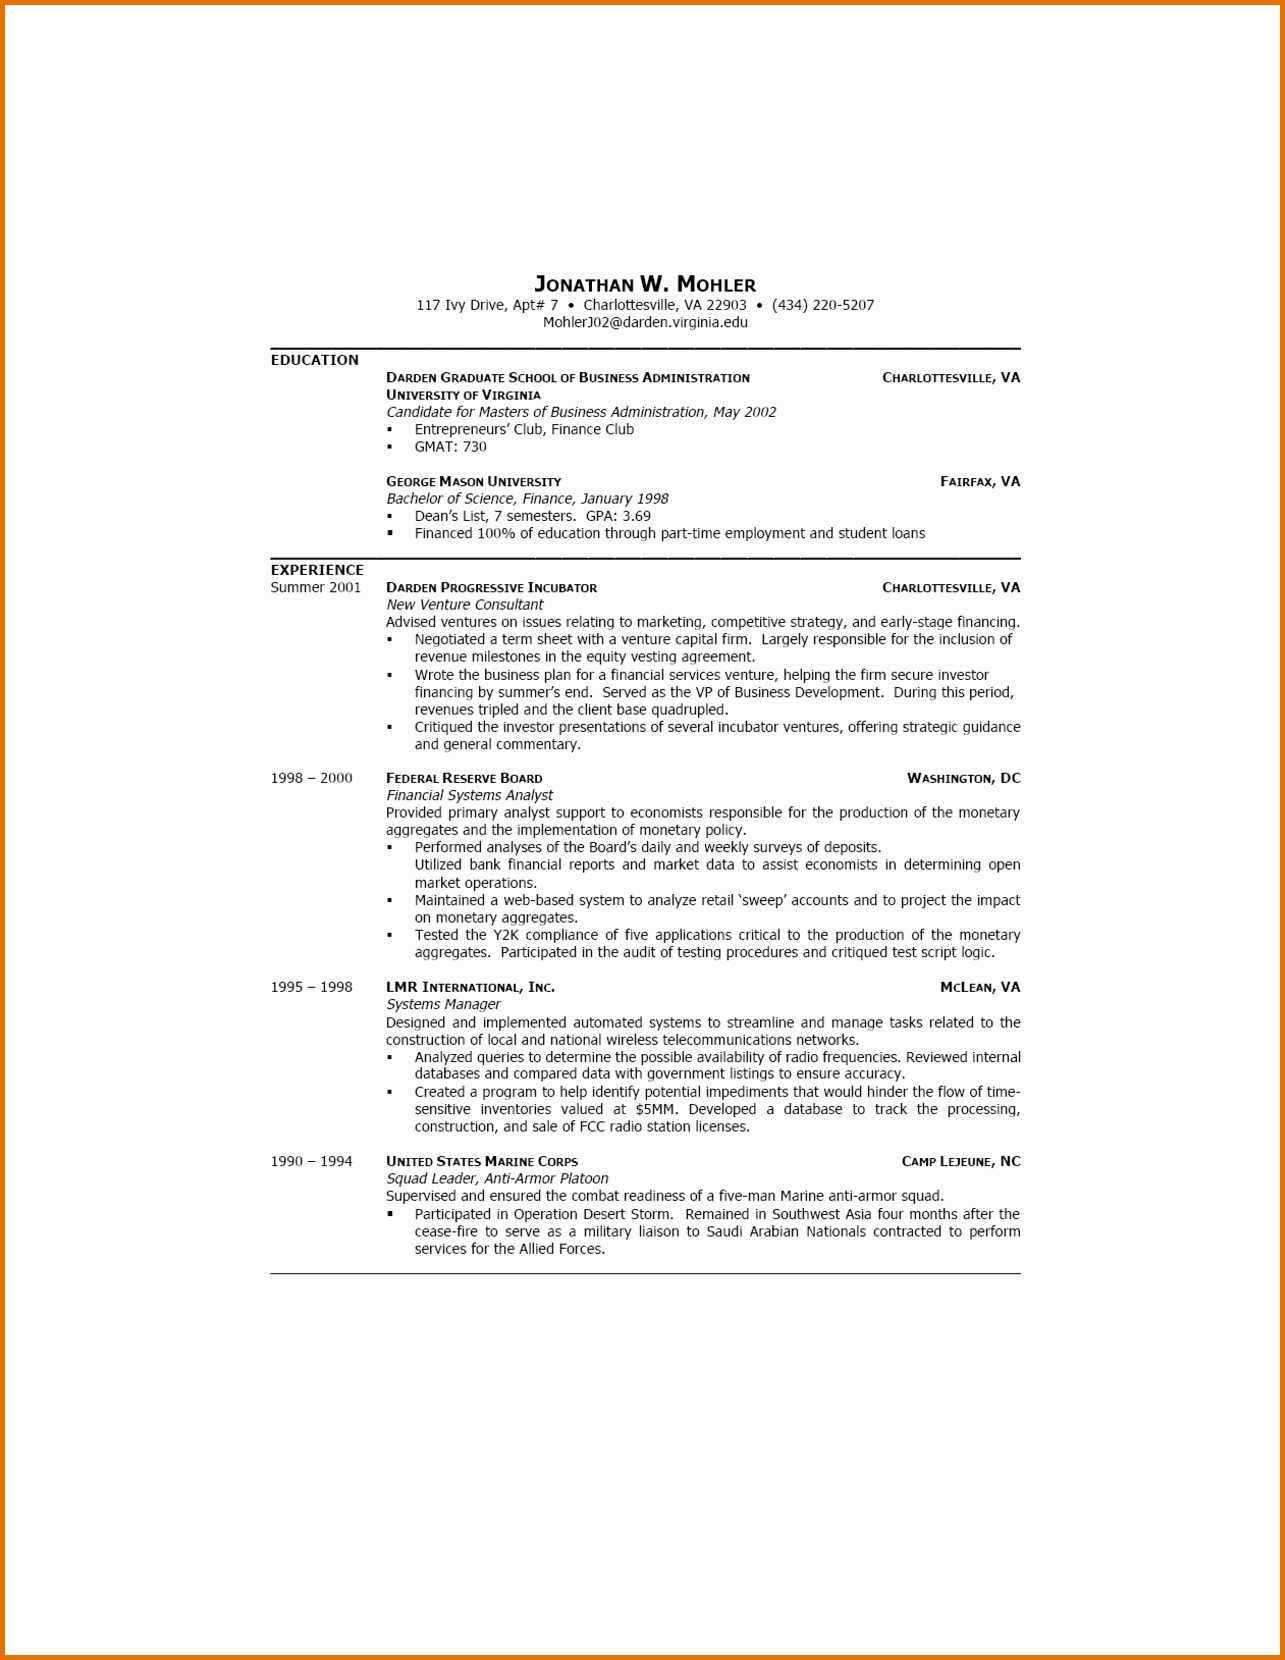 Basic Resume Examplesreference Letters Words